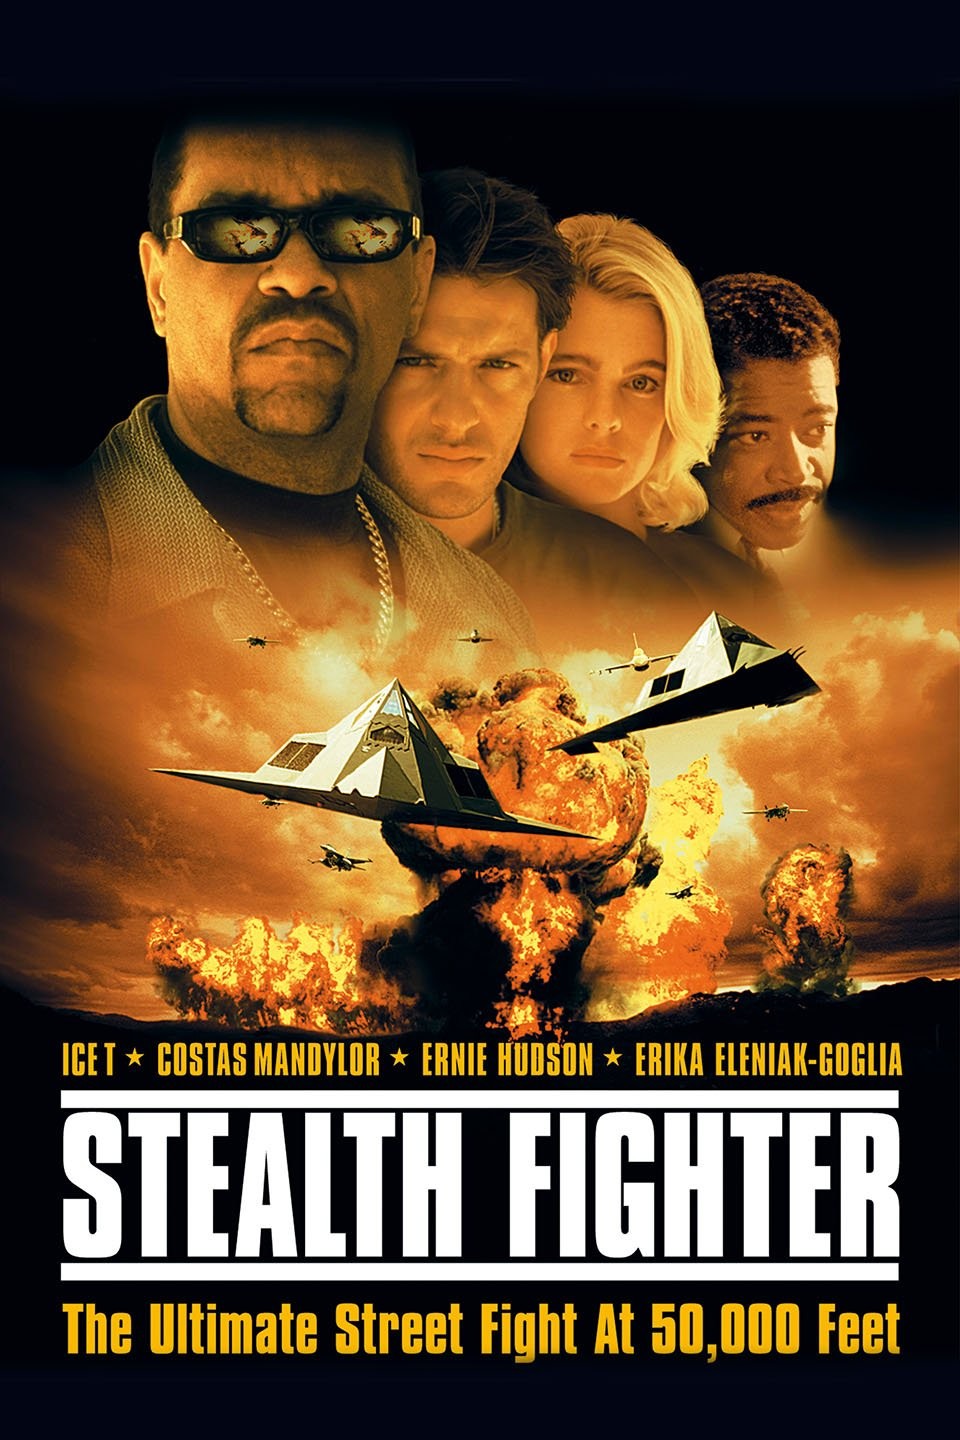 stealth movie poster